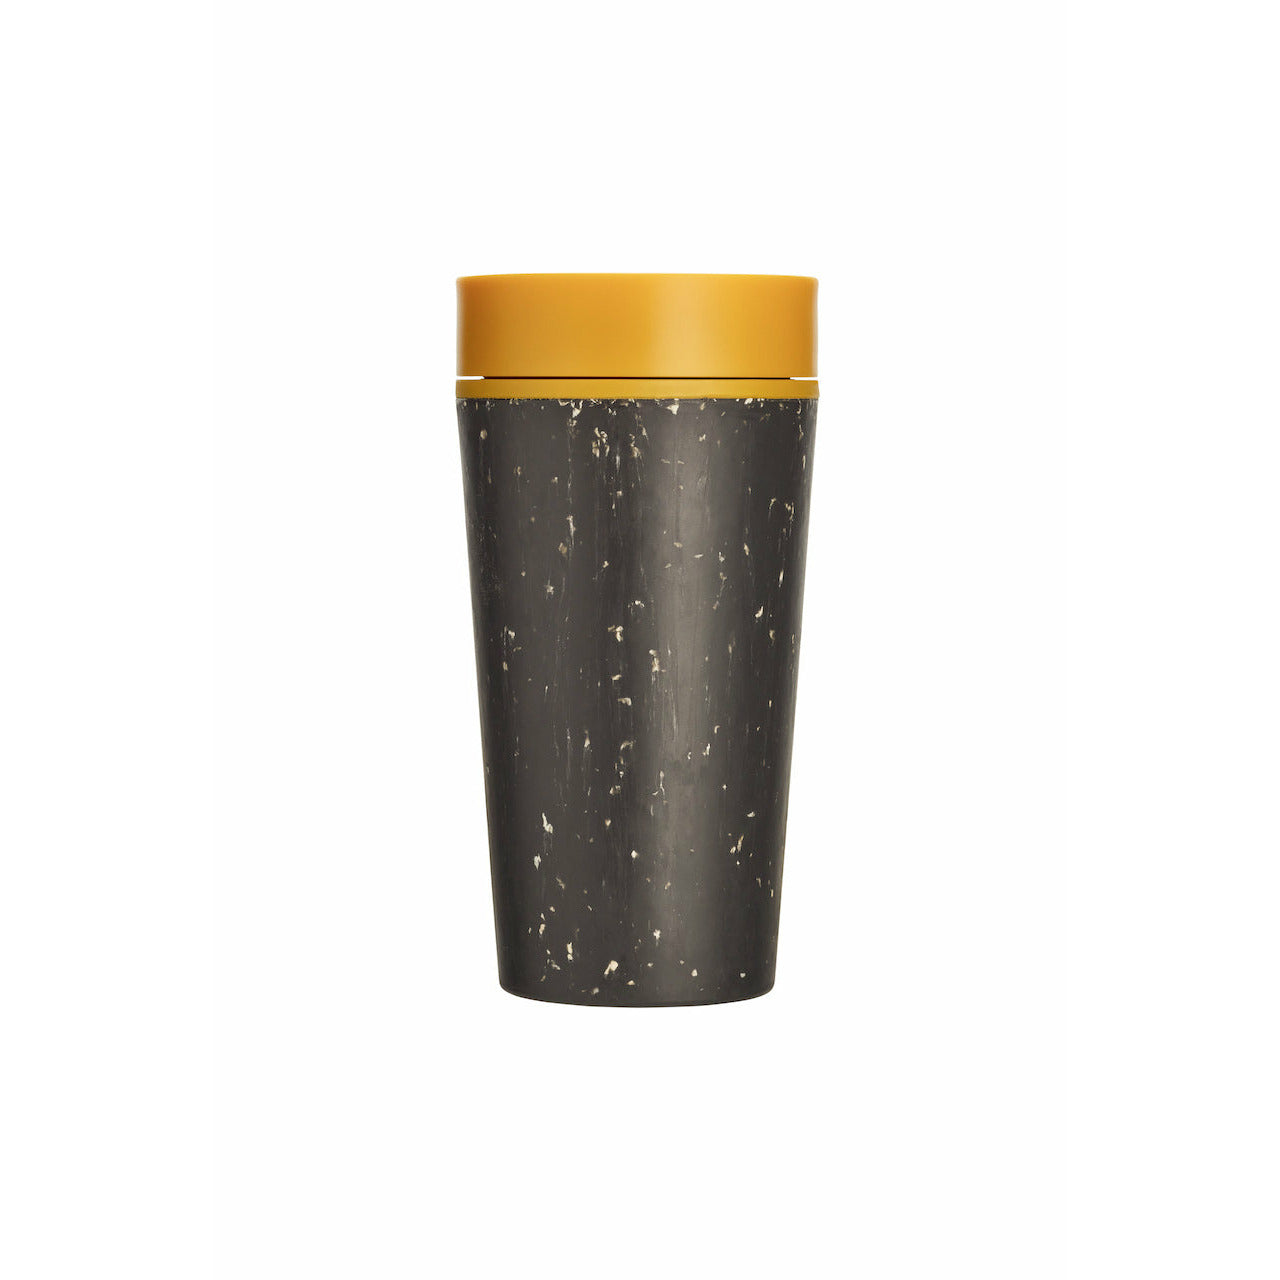 Reusable coffee cup black and mustard